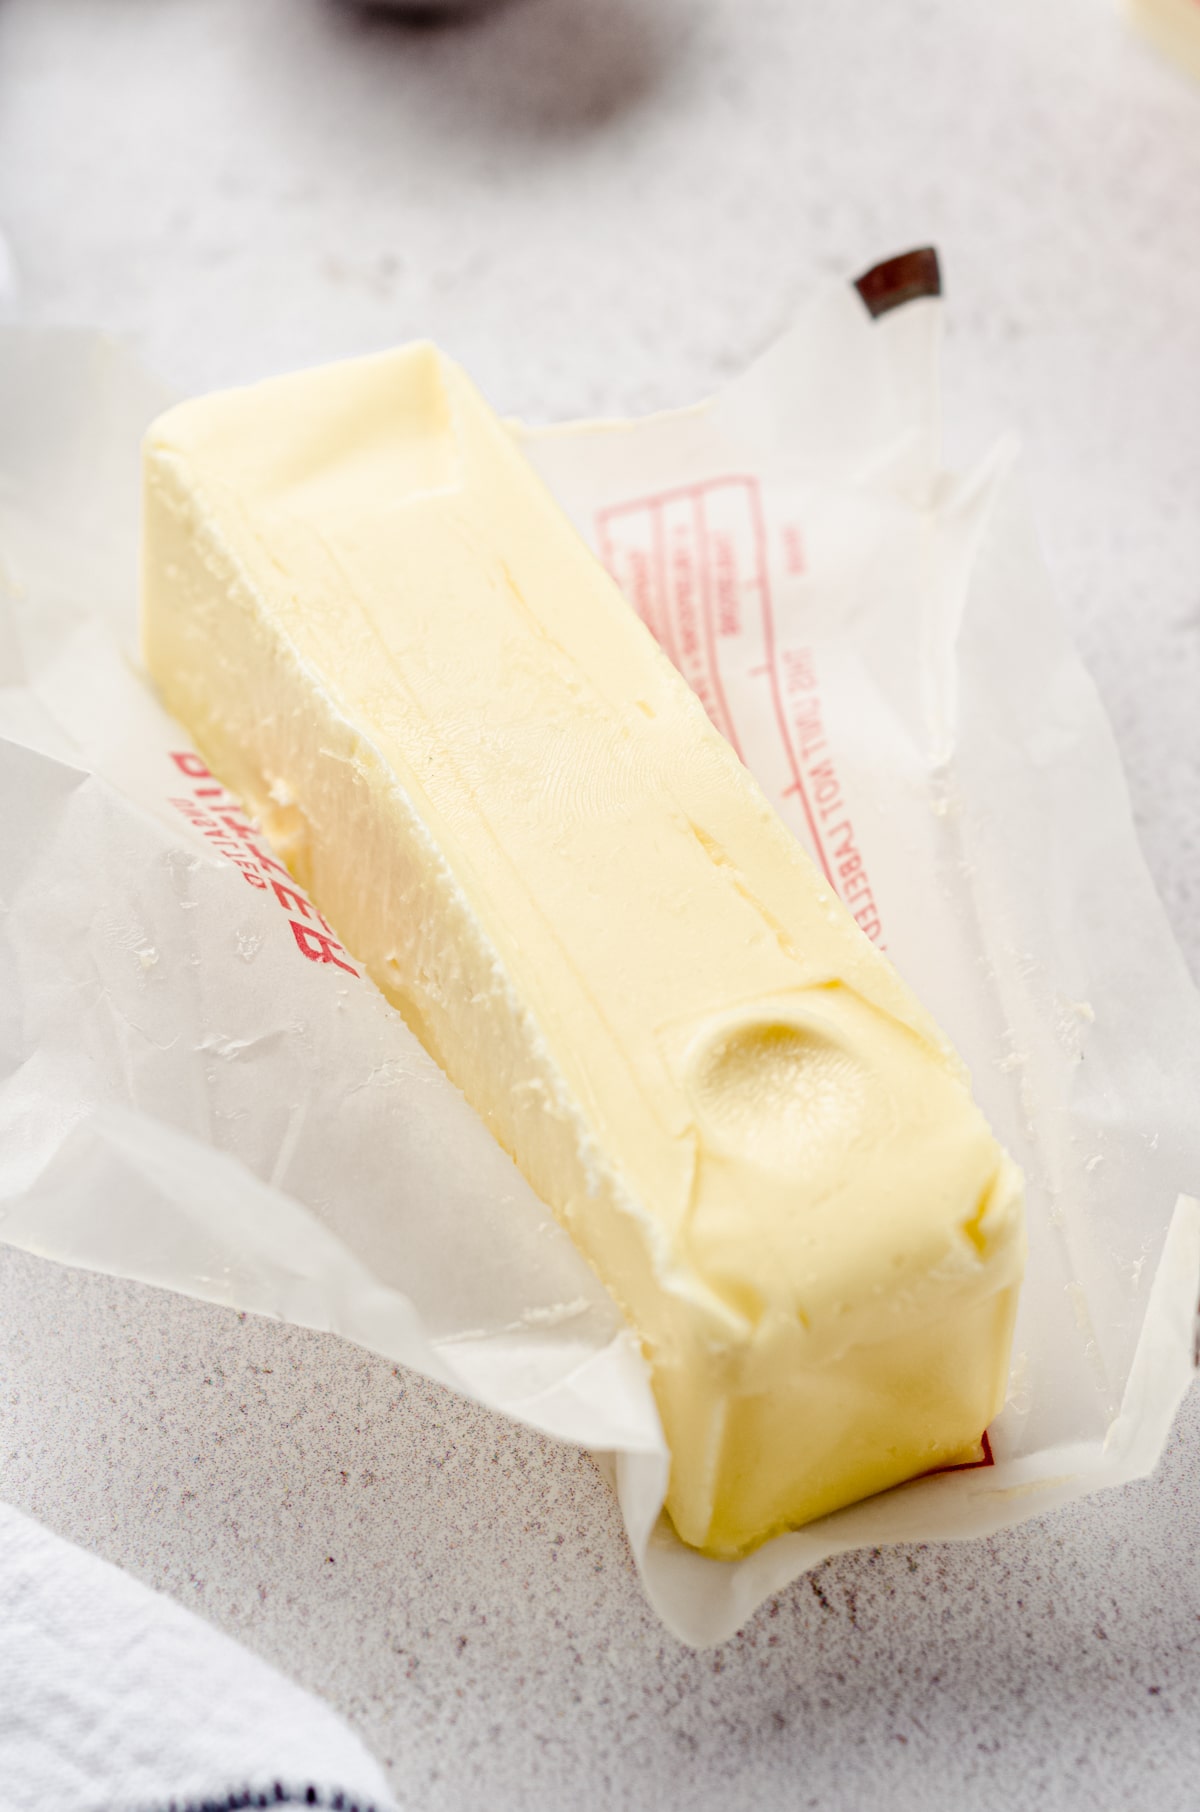 A stick of room temperature butter with a finger imprint indicating it's ready to use.